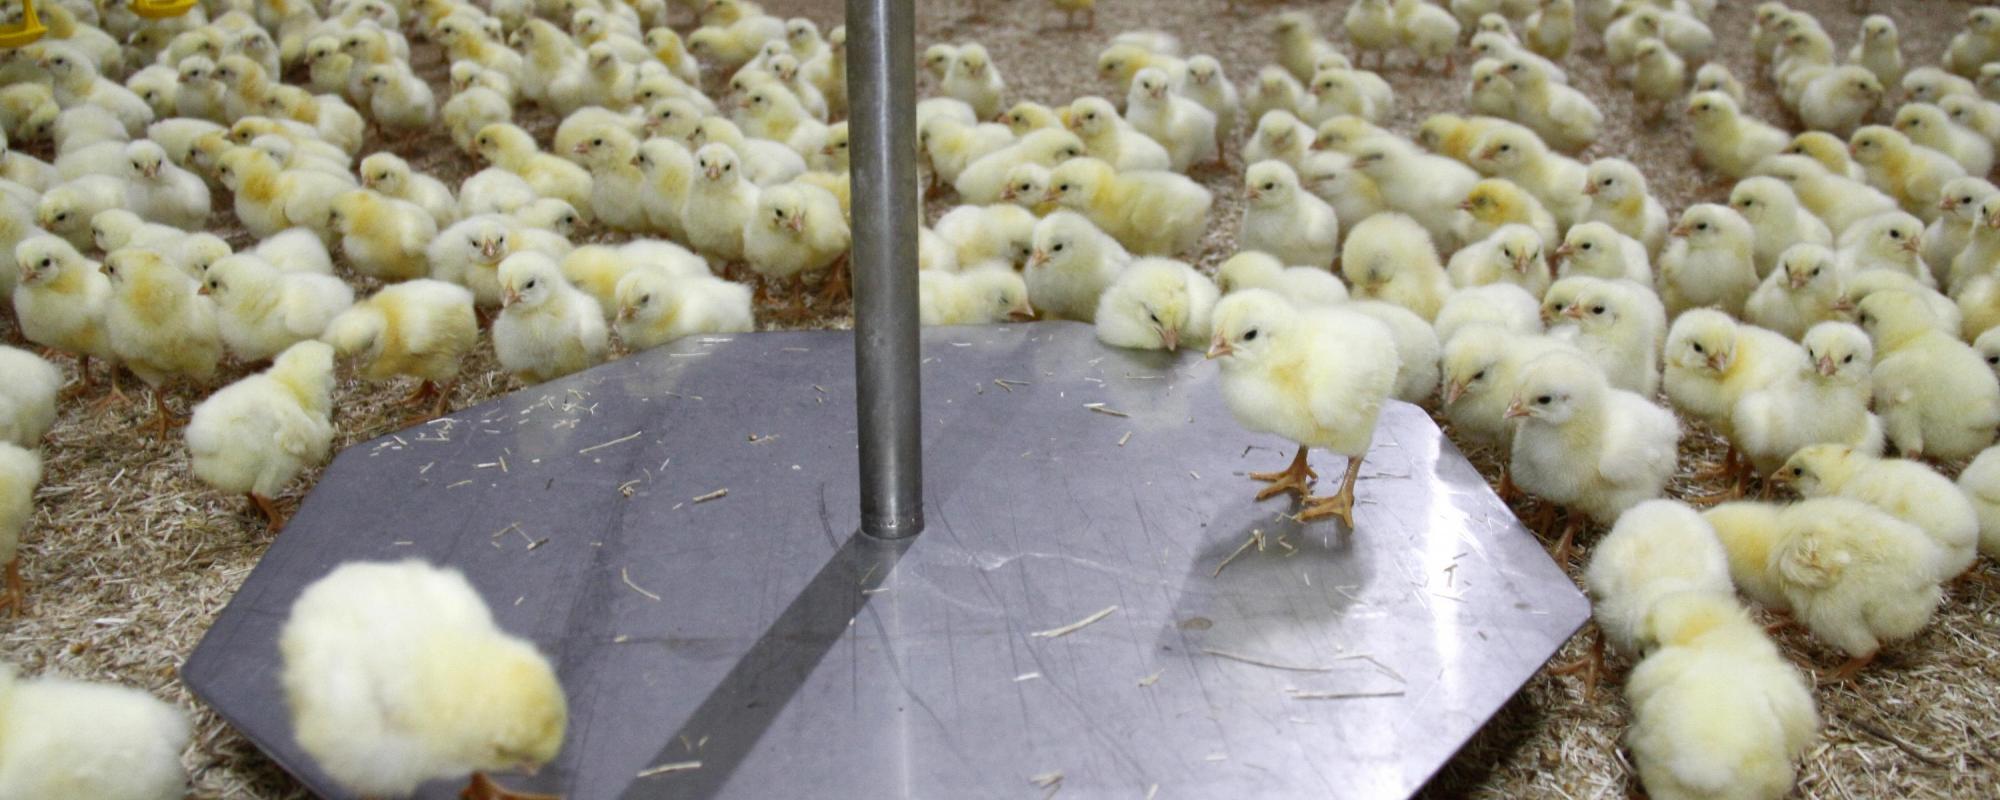 Accurate poultry weighing system - Livestock Farming